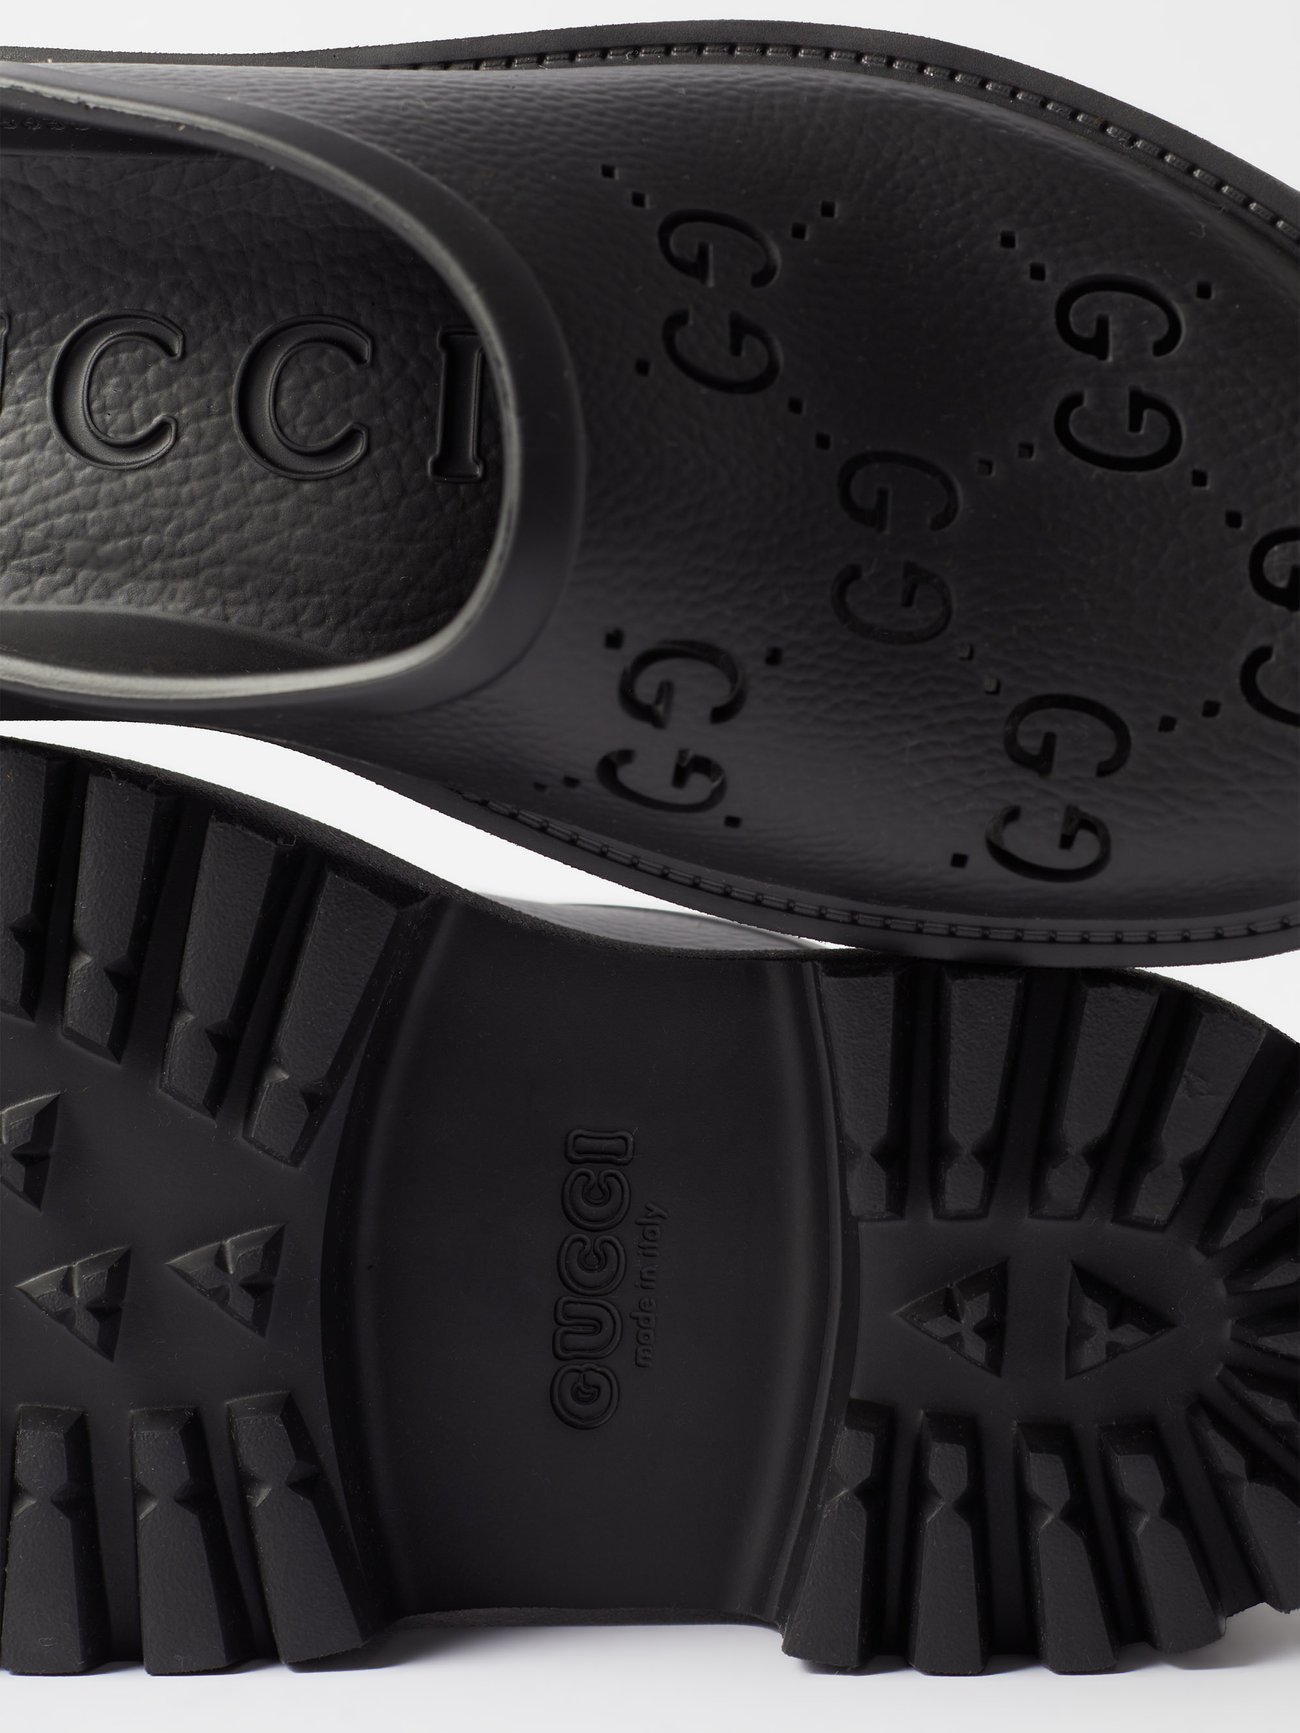 Gucci's Latest Perforated Rubber Clogs Worth Rs 40K Leave Netizens